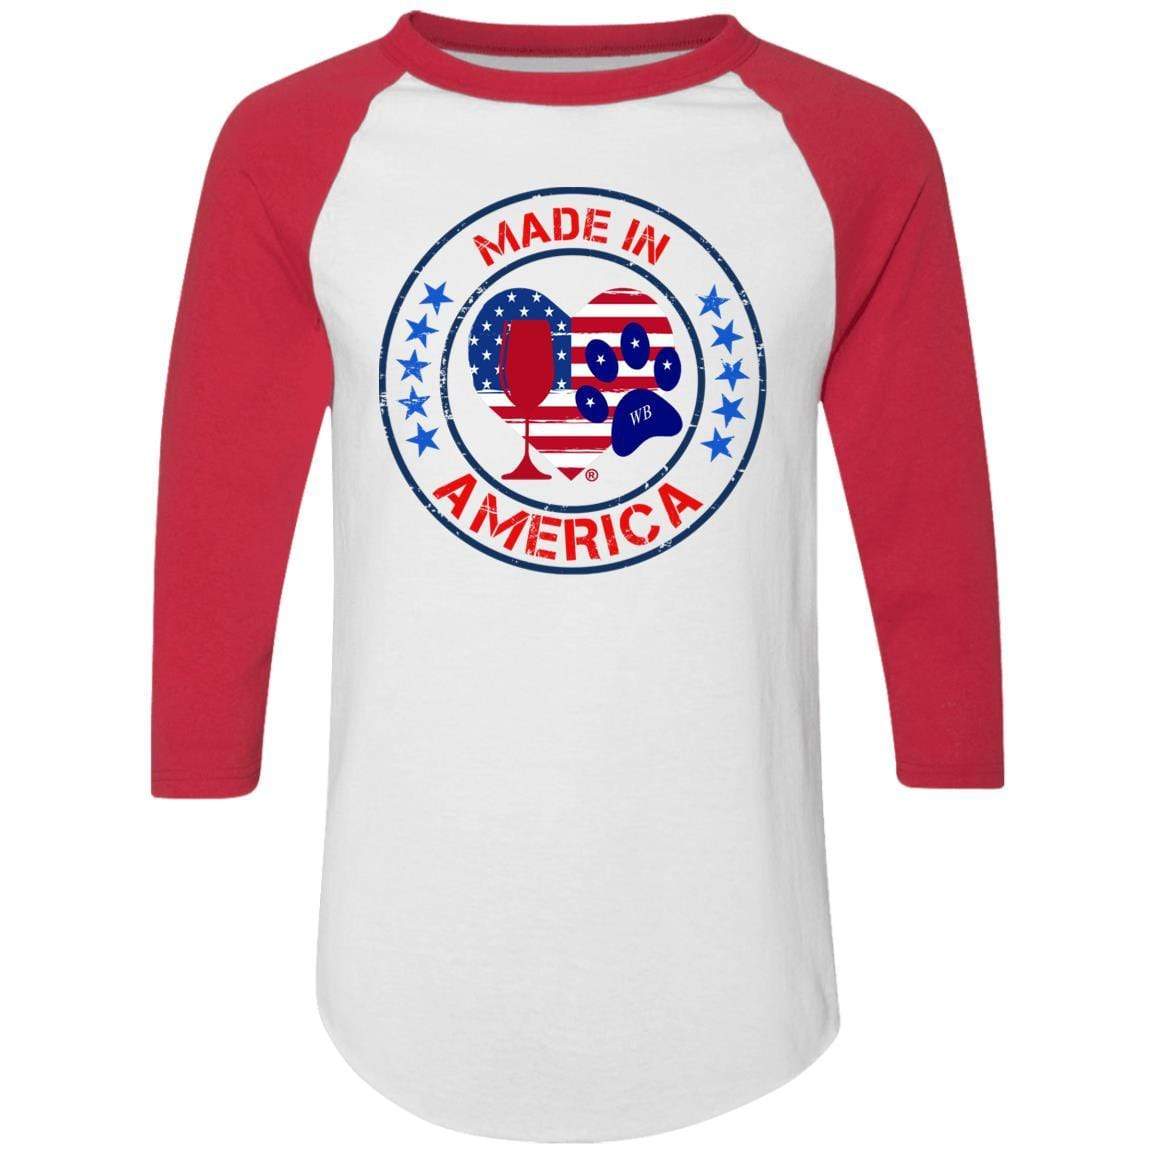 T-Shirts White/Red / S Winey Bitches Co "Made In America" Colorblock Raglan Jersey WineyBitchesCo